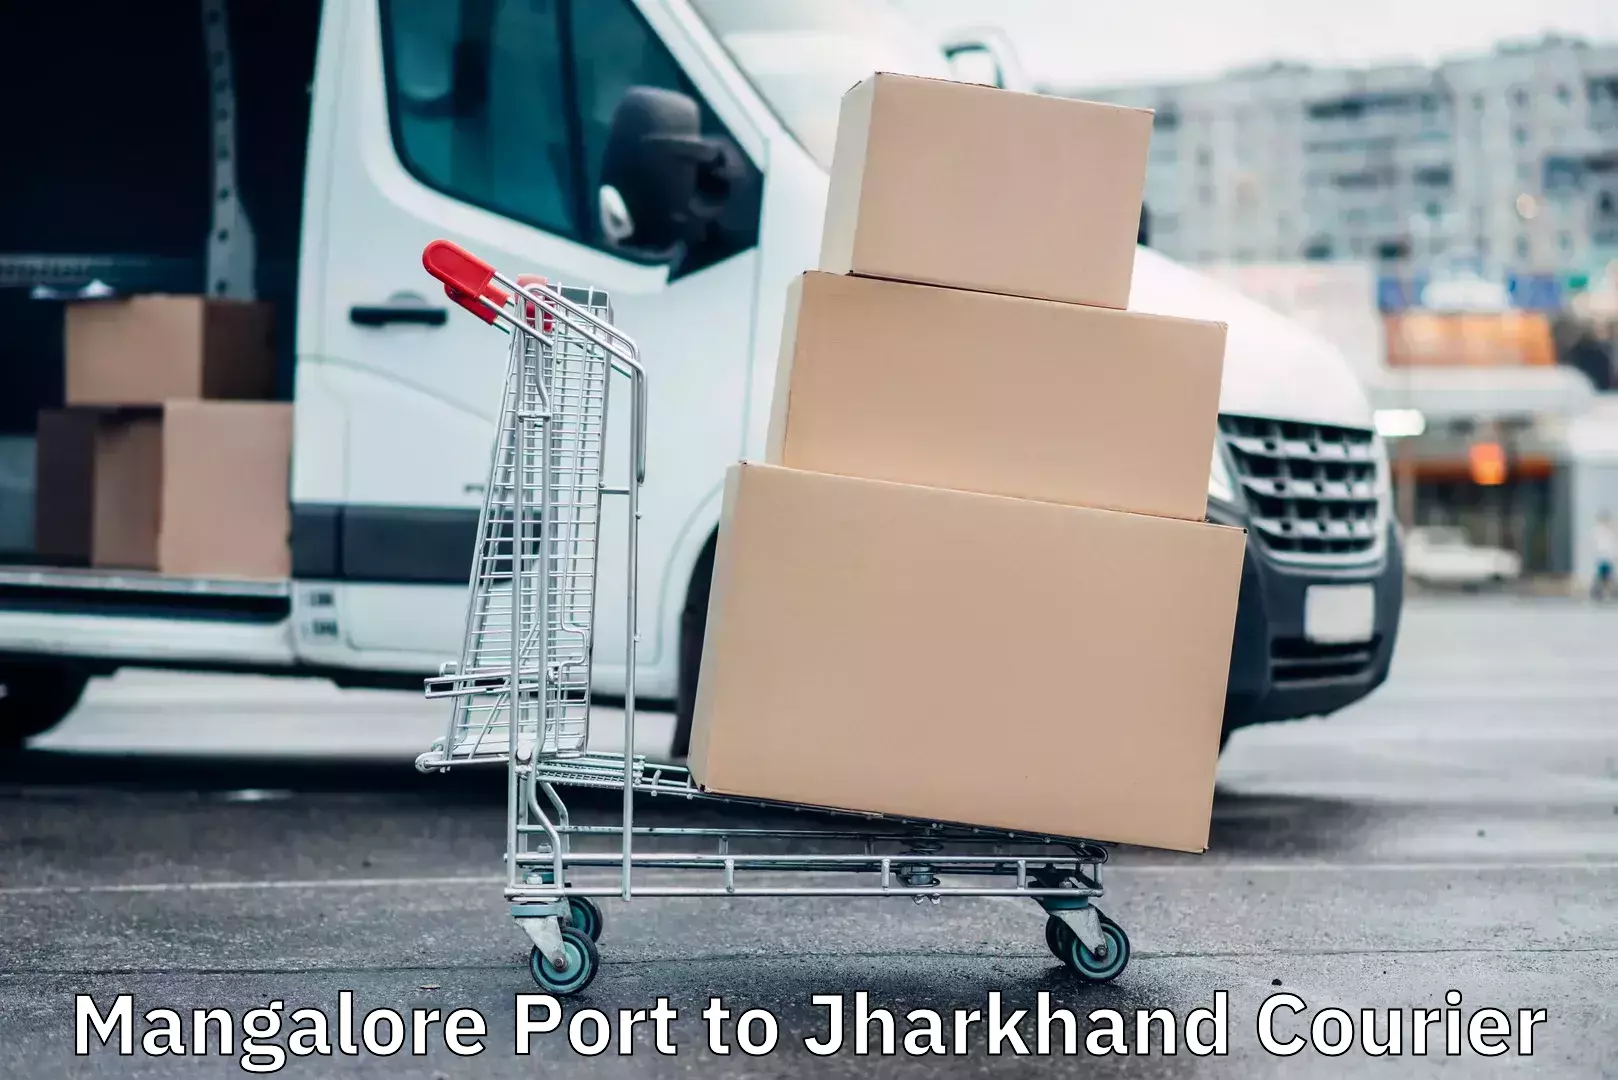 Reliable courier service Mangalore Port to Jharkhand